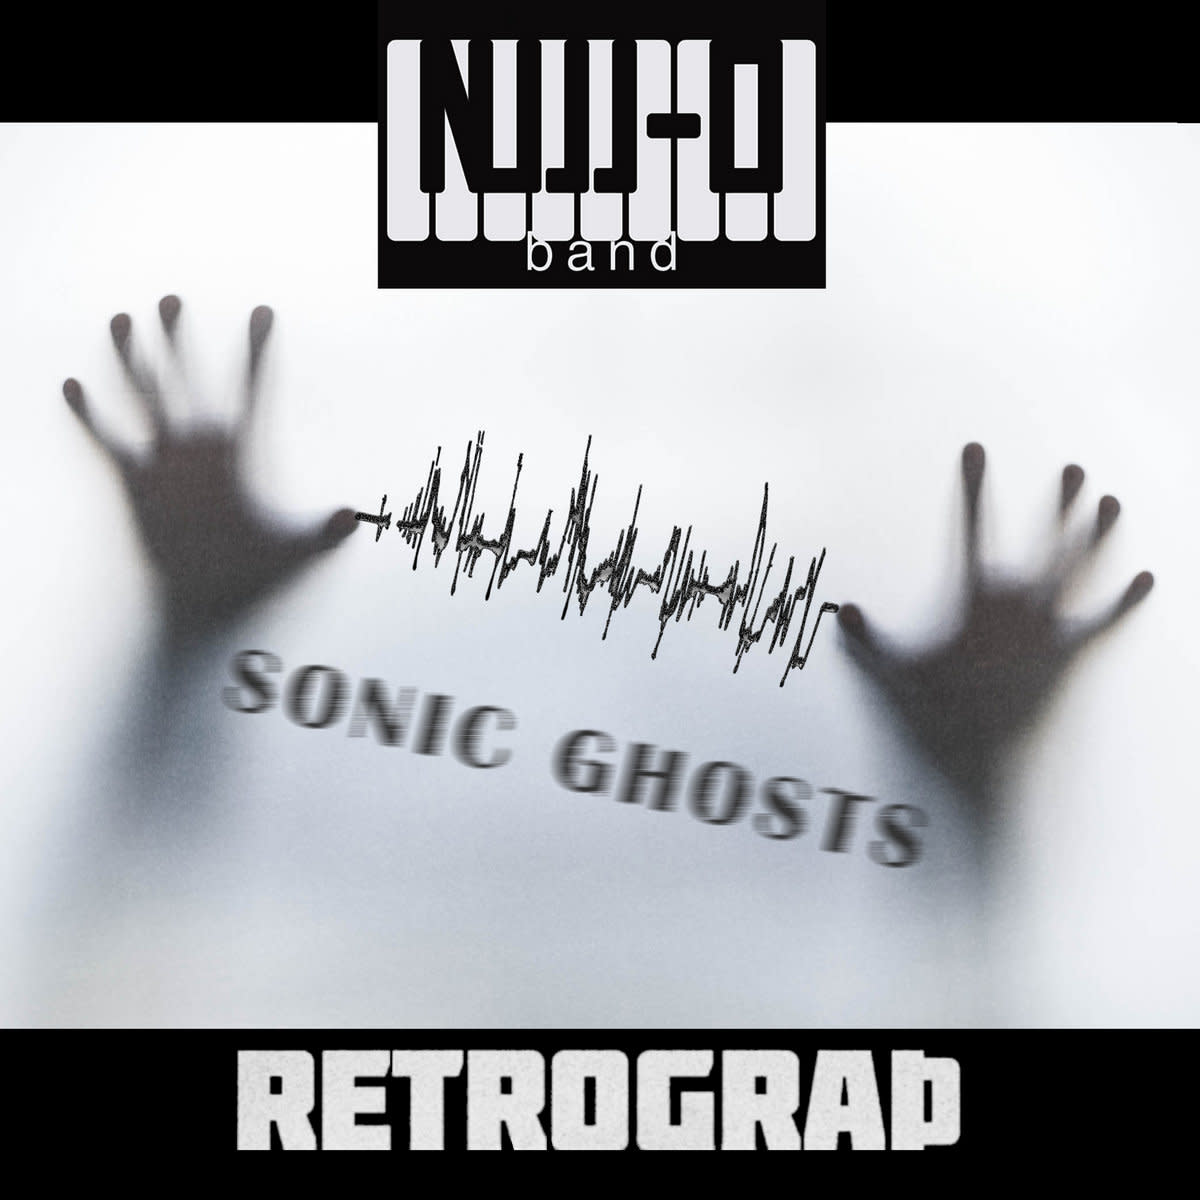 synth-single-review-sonic-ghosts-by-null-o-band-retrograth